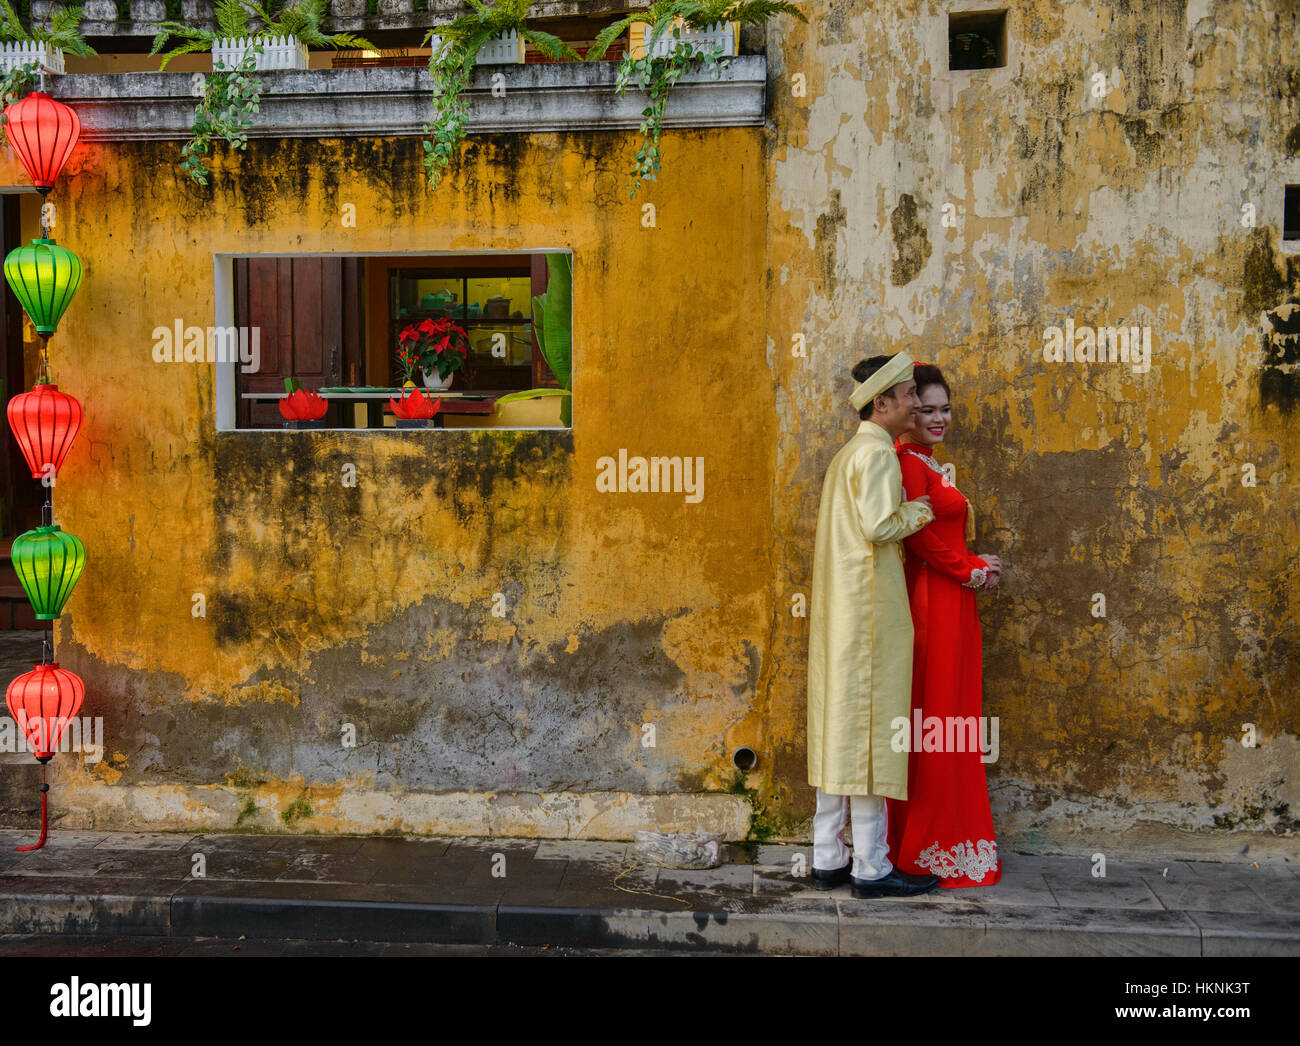 Marital bliss in old town Hoi An, Vietnam Stock Photo